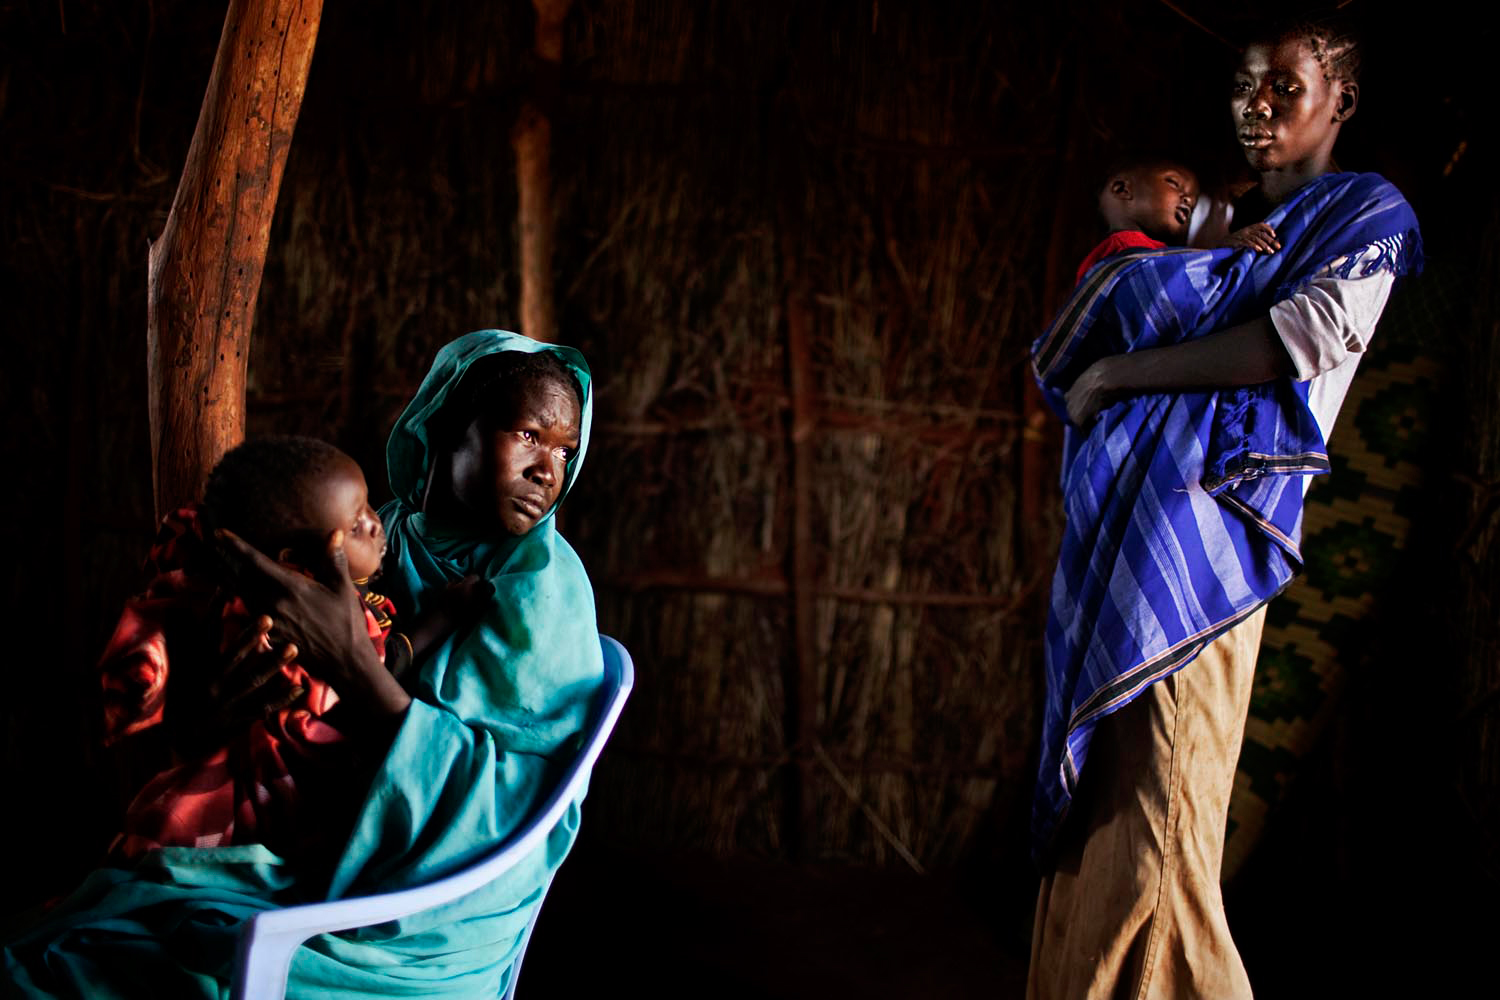 Nuba women wait to have their children examined at a clinic.